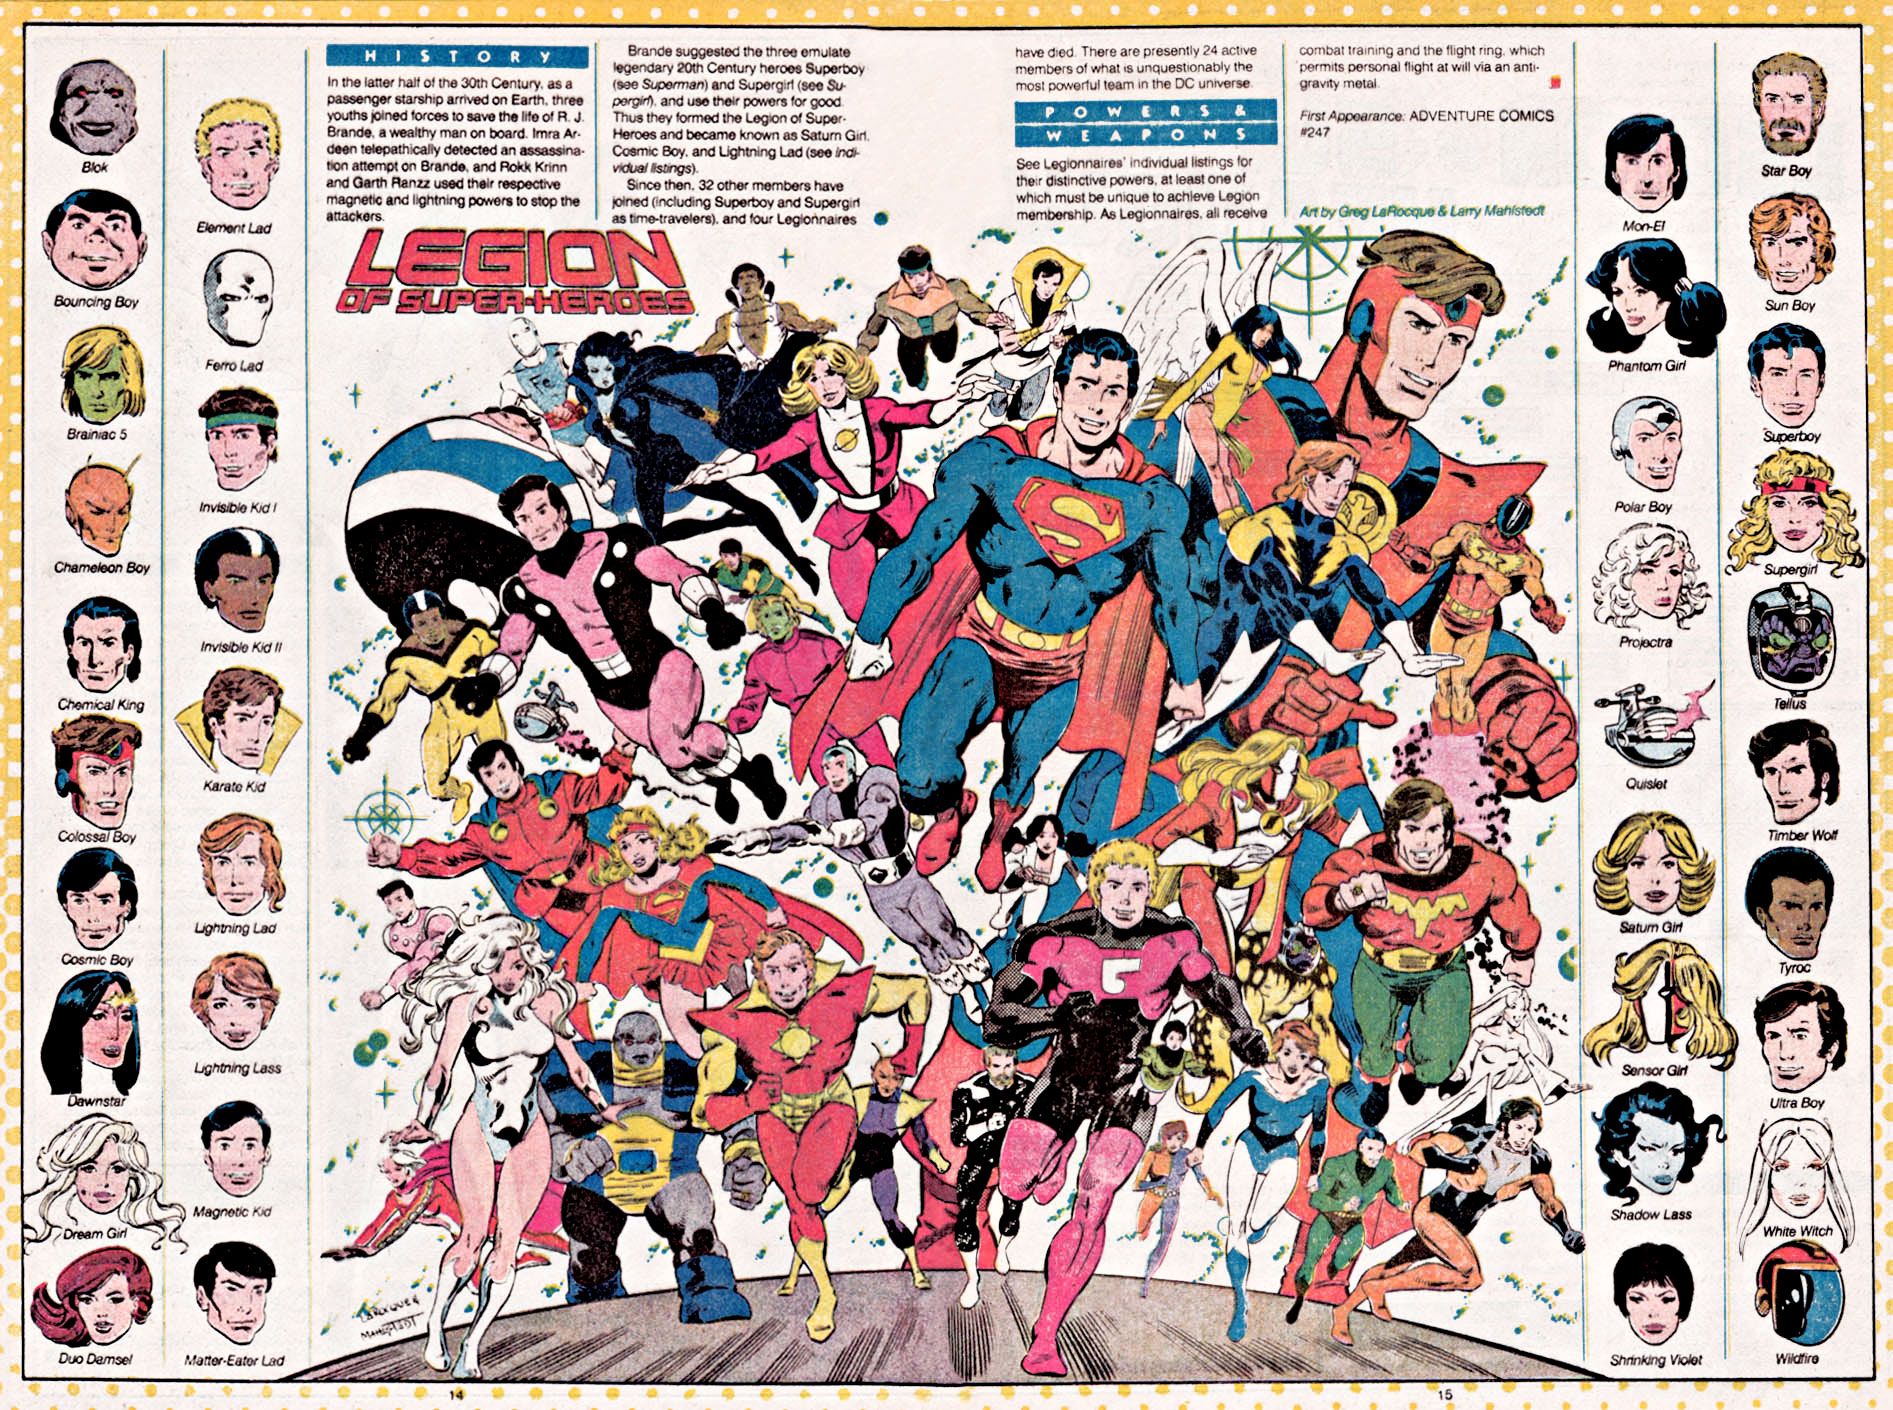 The original Legion of Super-Heroes, from DC's original &quot;Who's Who&quot; miniseries